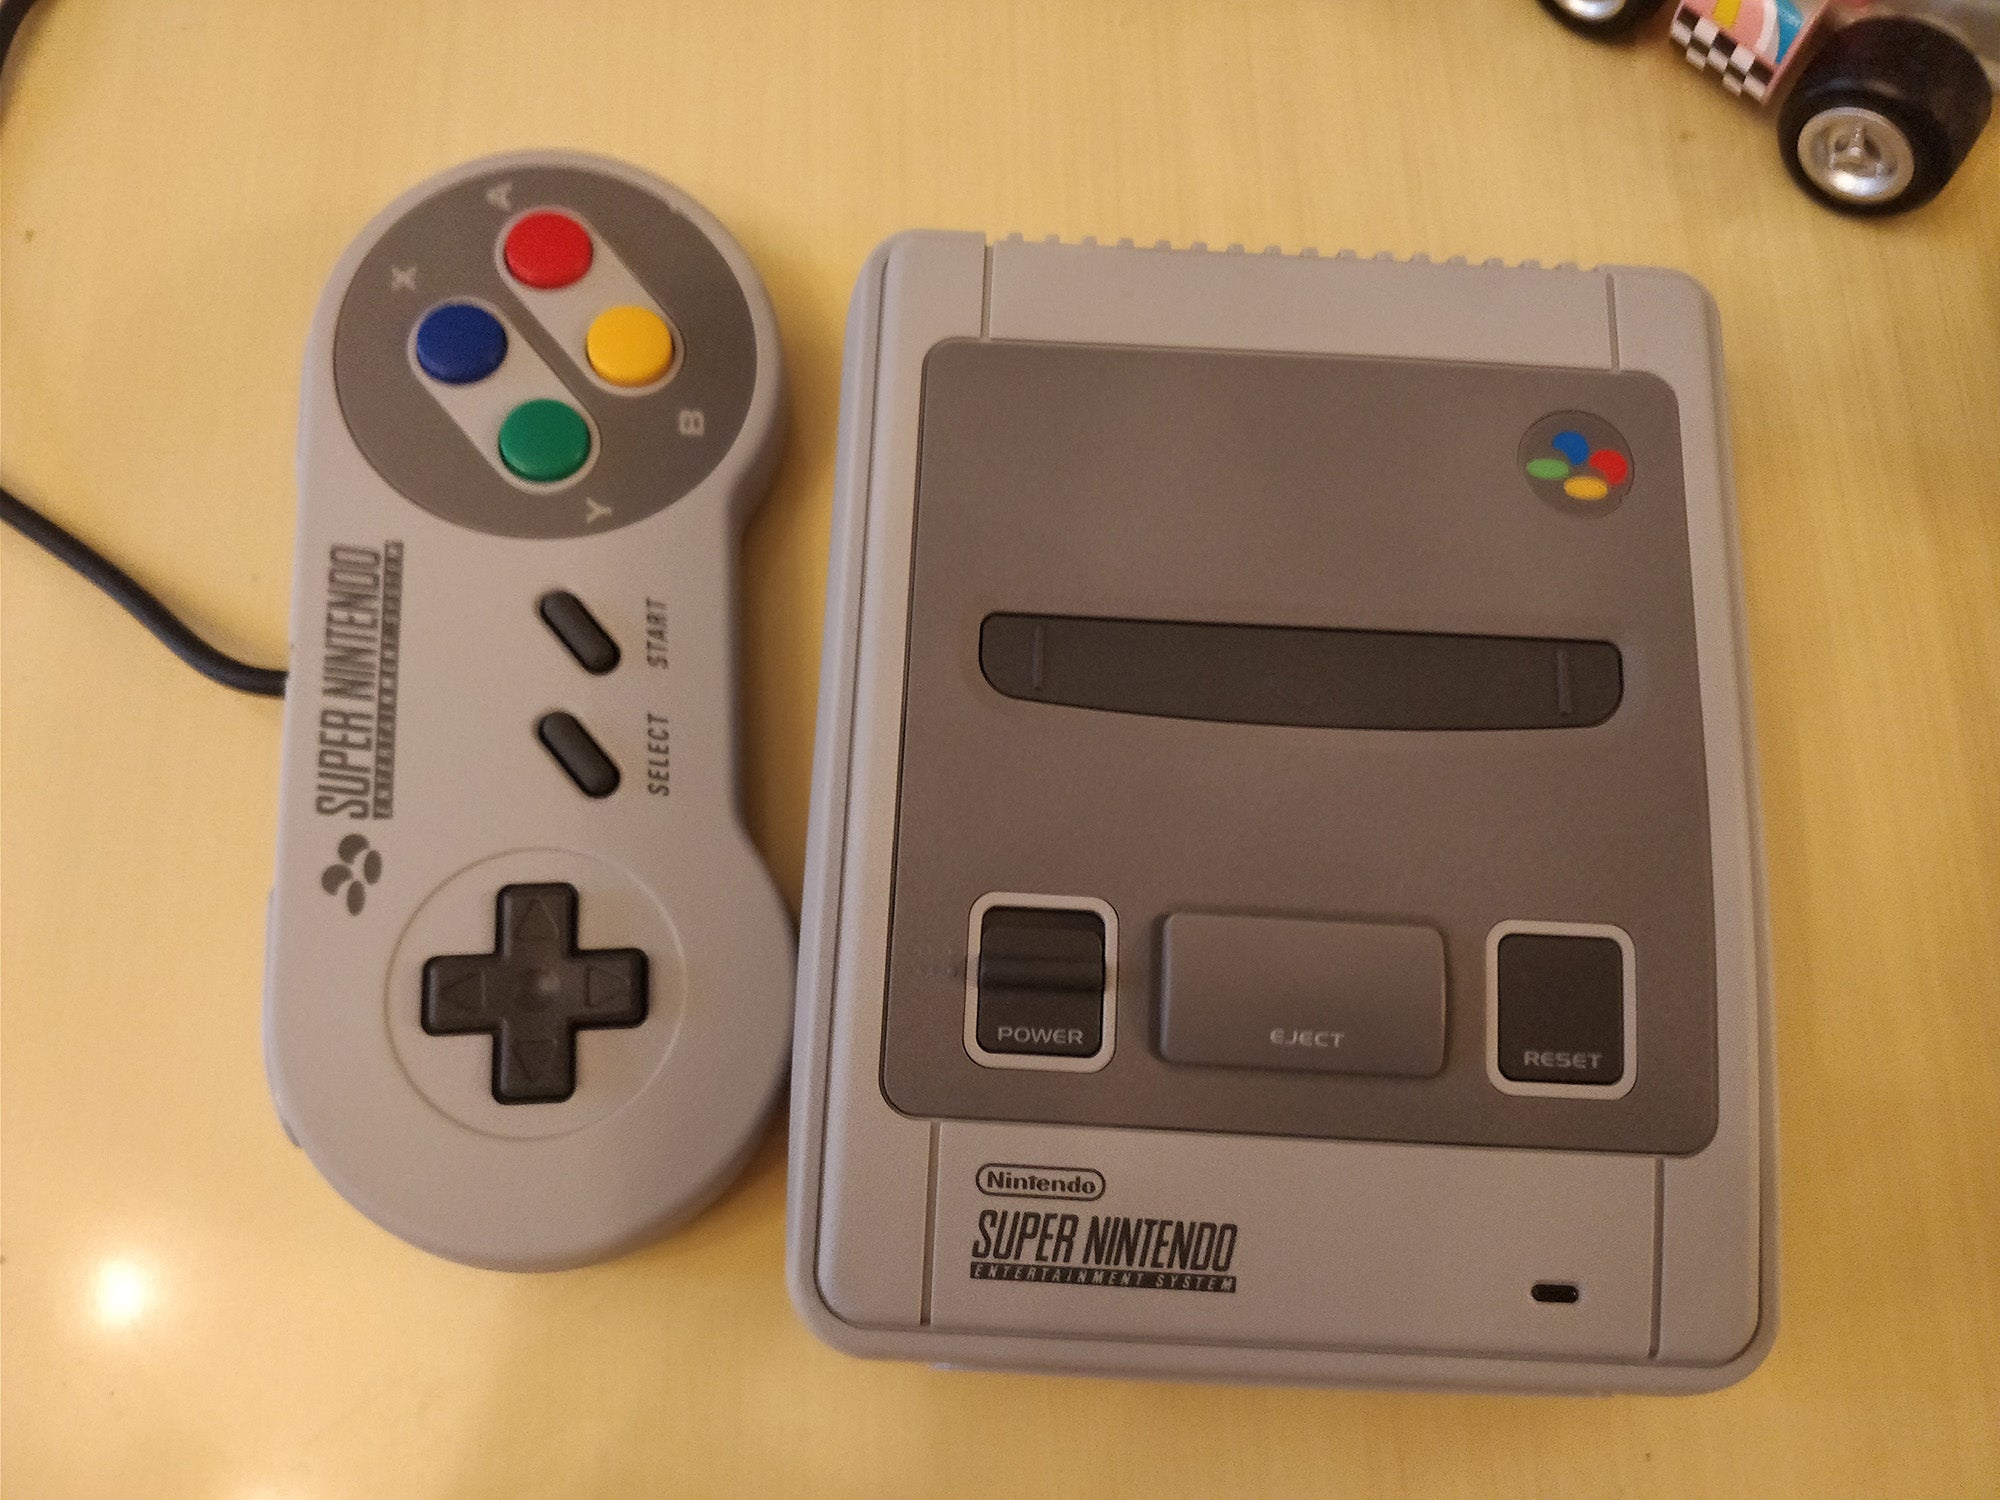 Nintendo Classic Mini SNES console and controller on table.